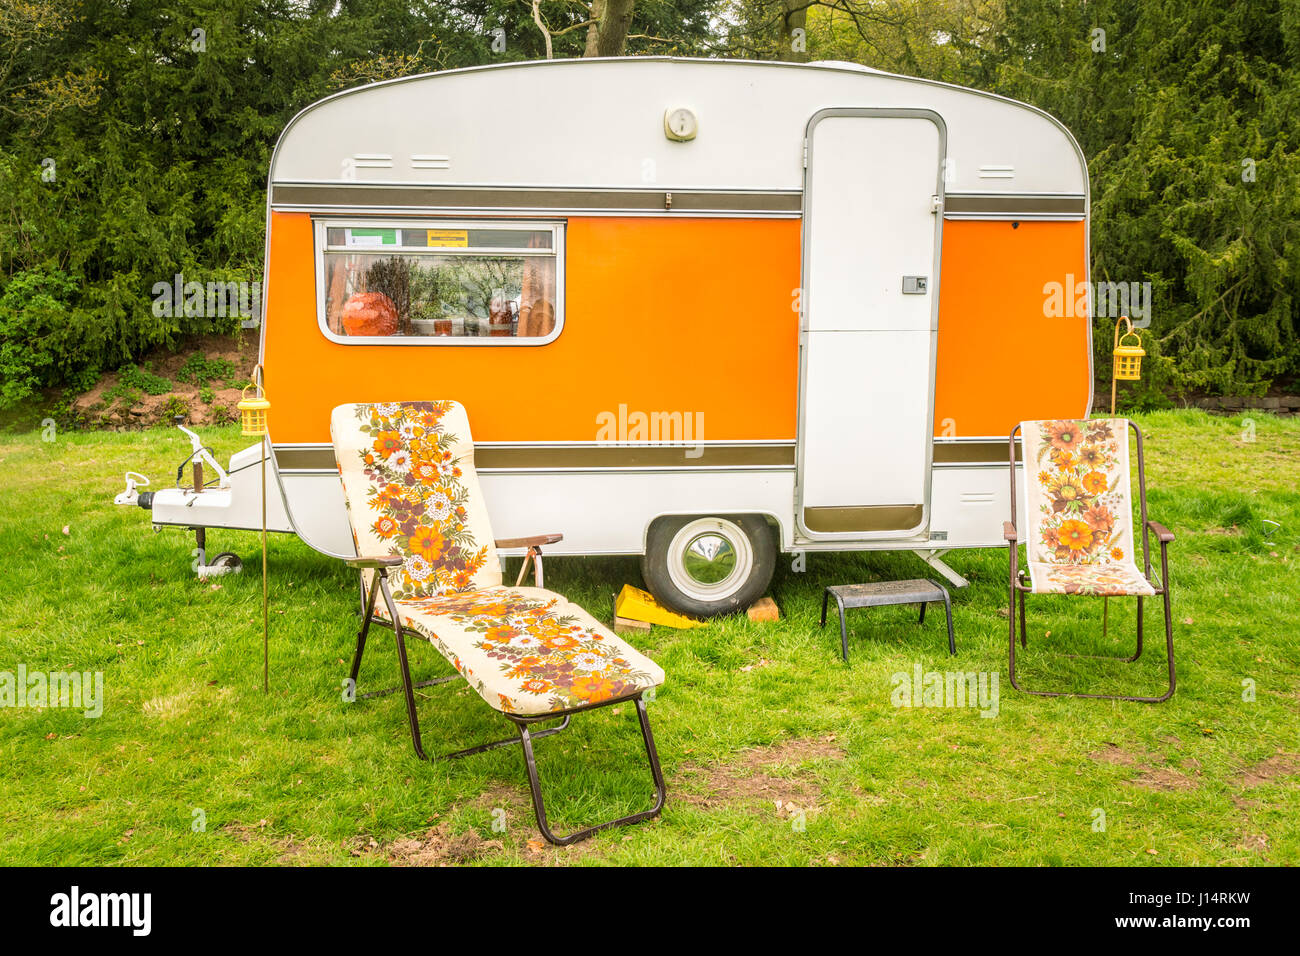 Typical old caravan or caravans in a park, Britain, in spring holiday Stock Photo